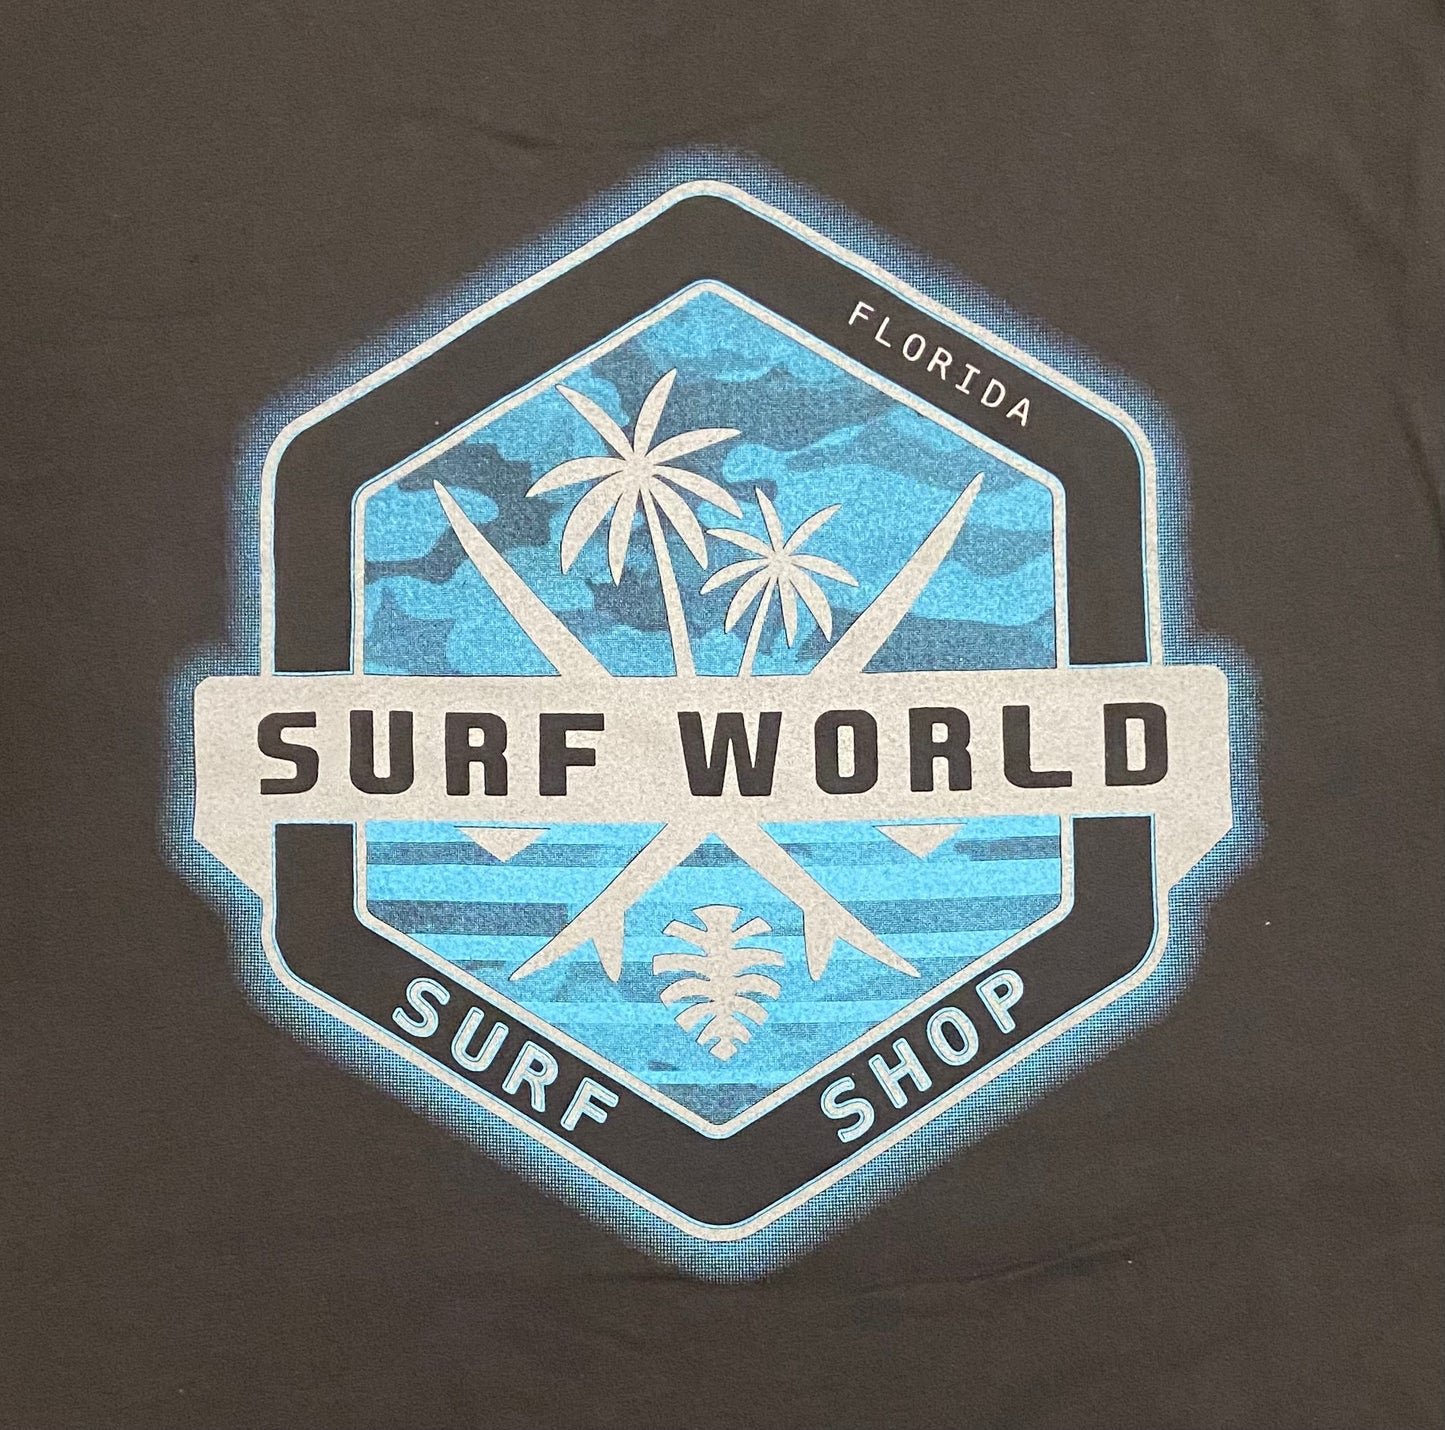 Surf World The Hex Boards and Palms Tee Shirt - Washed Black Mens T Shirt